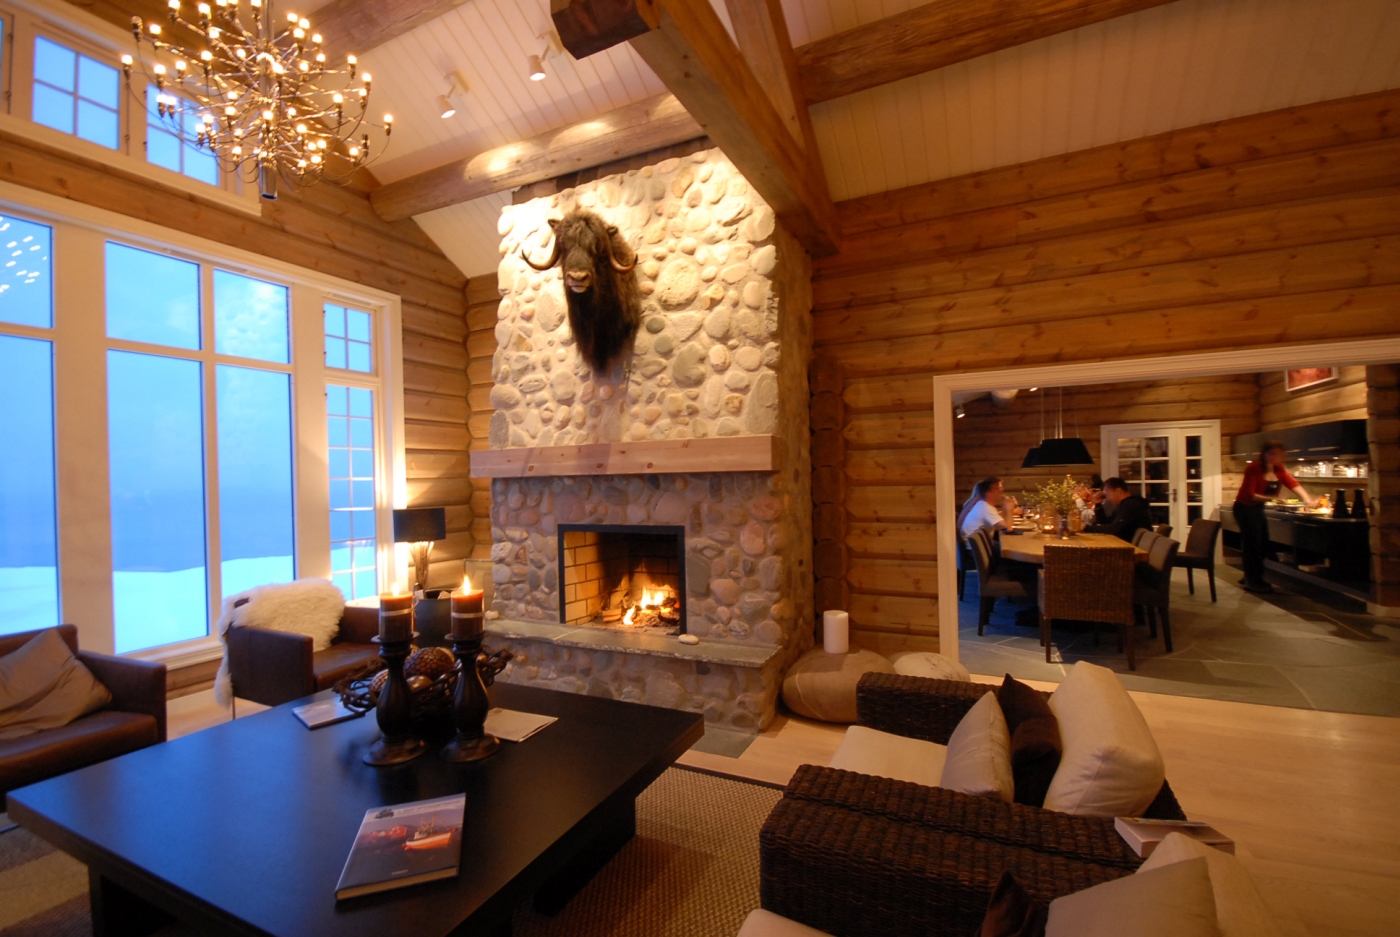 Cosy lounge area with fireplace at Lyngen Lodge in Norway